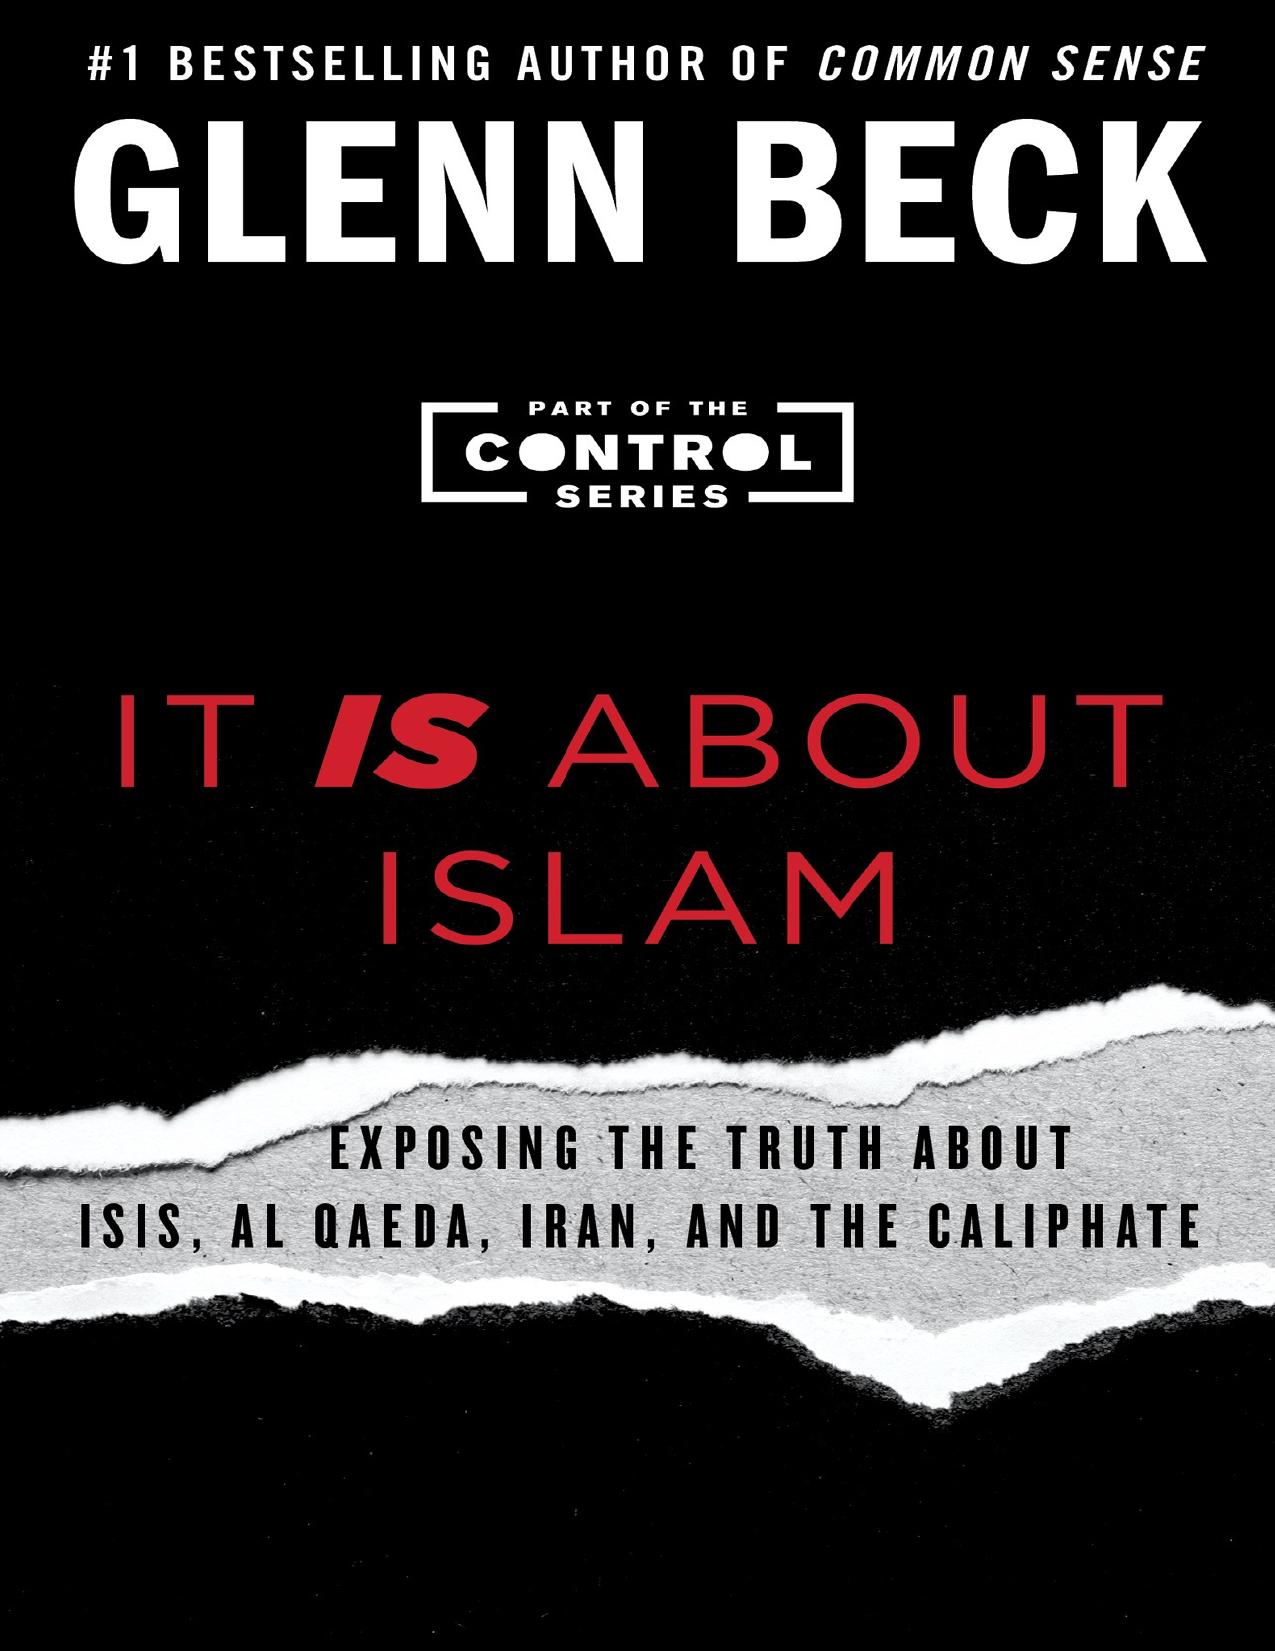 It IS About Islam: Exposing the Truth About ISIS, Al Qaeda, Iran, and the Caliphate - PDFDrive.com